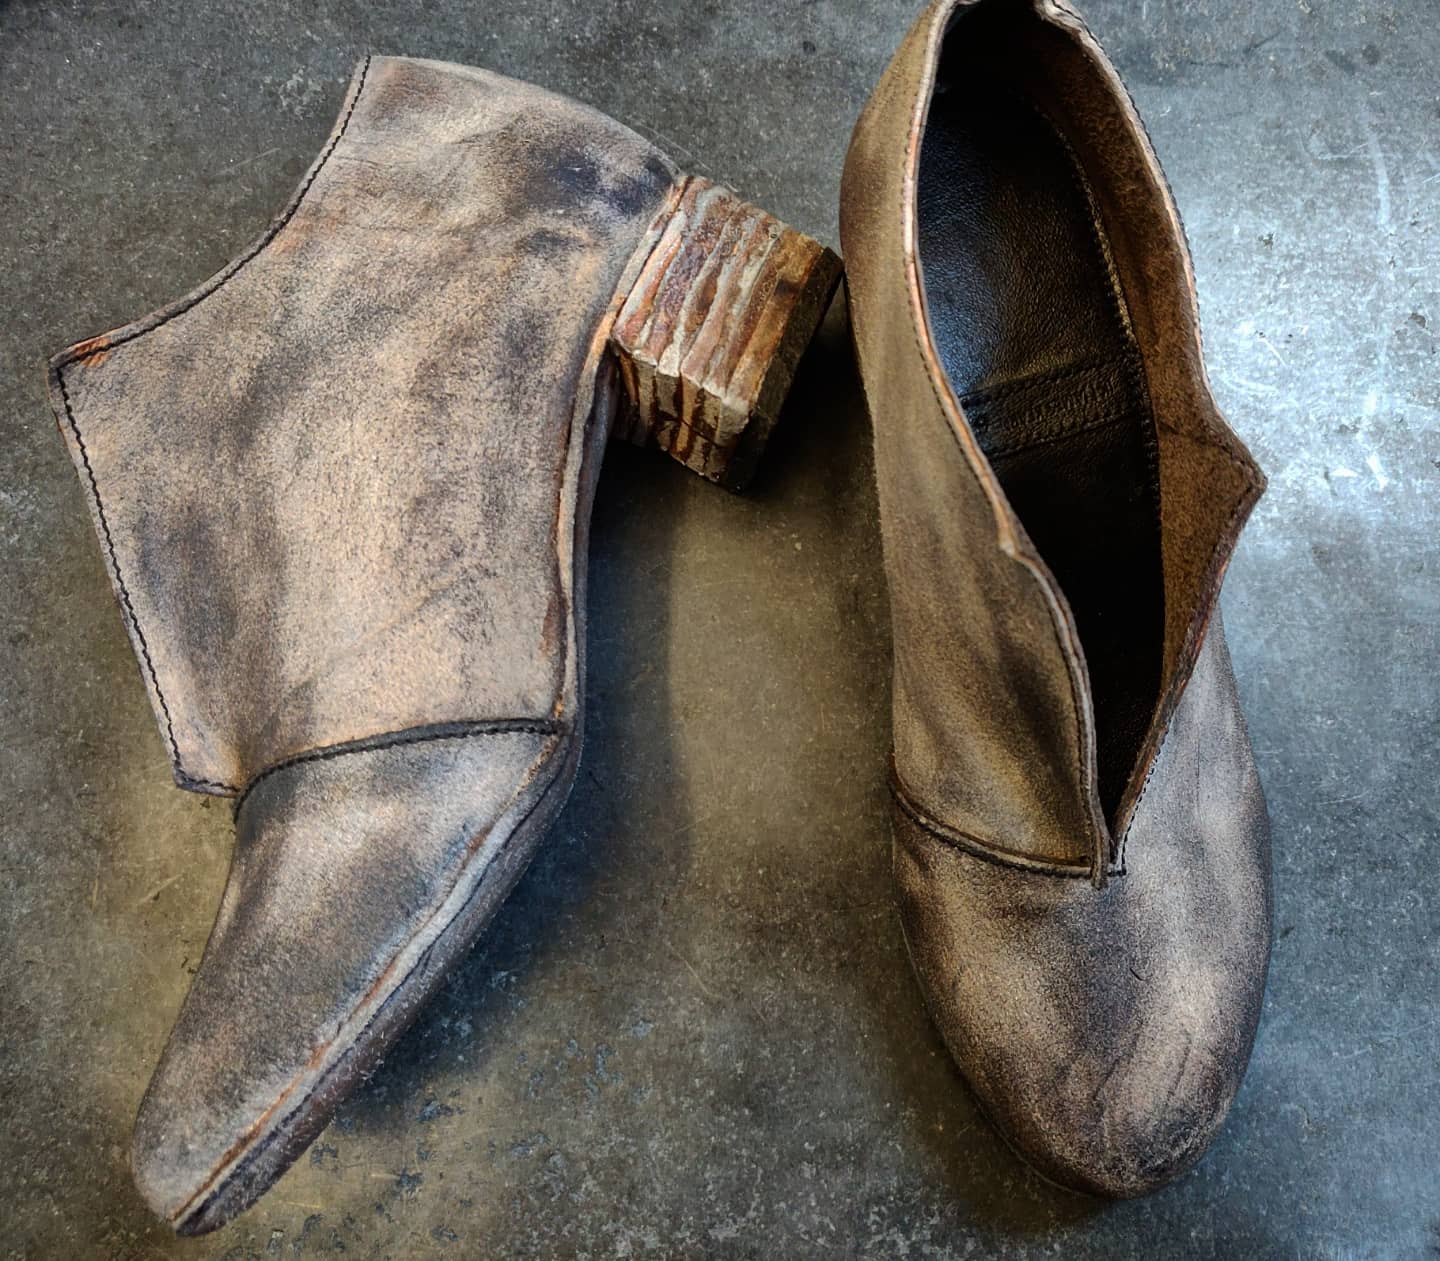 Grey leather boots with a 5cm block heel and leather soling. The boots have an opening at the front just over the vamp area to allow for no use of zips or laces. The colors are various shades of grey on the leather as opposed to an uniform dye.